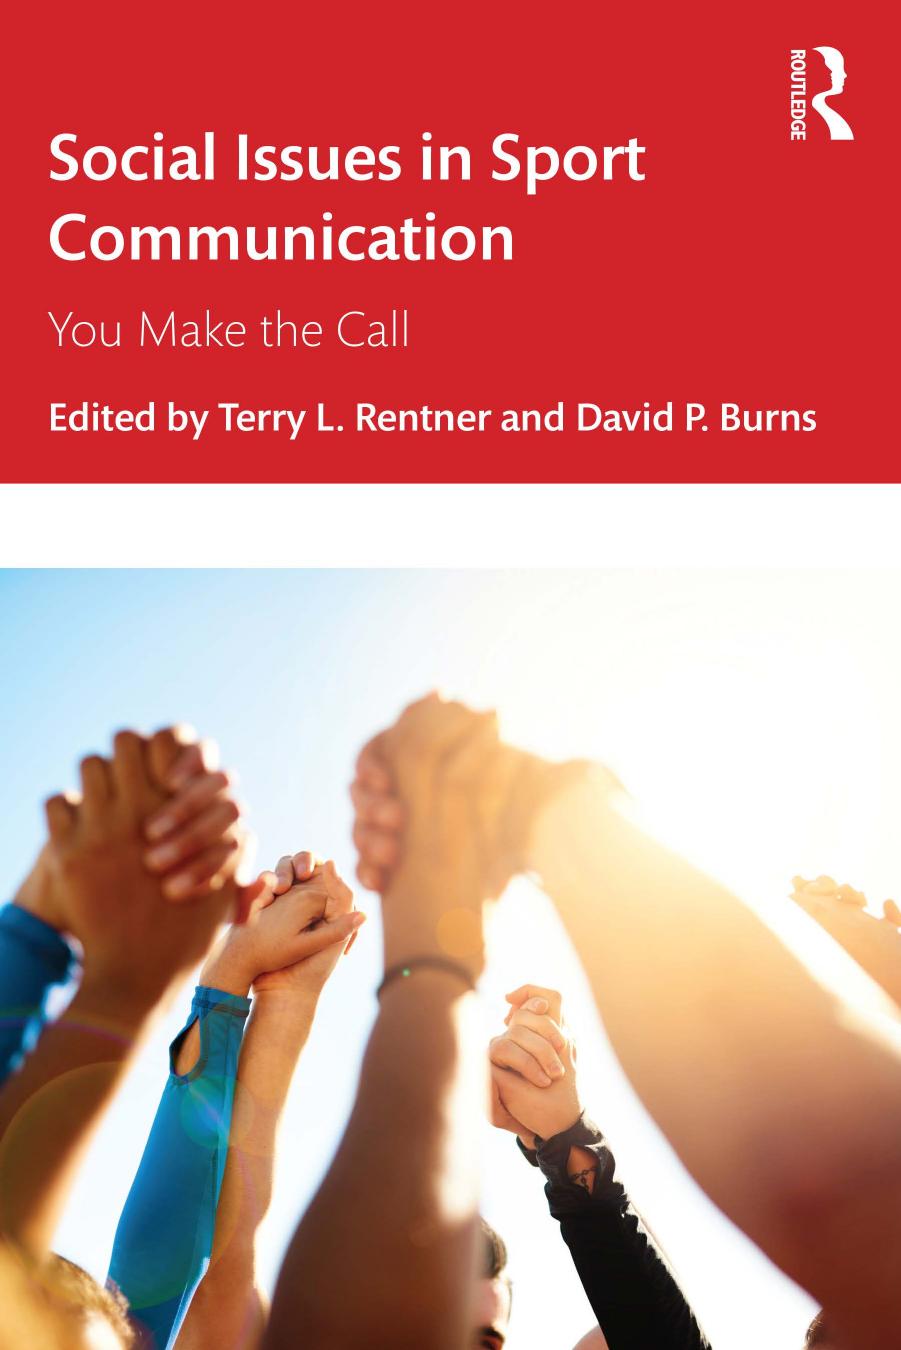 Social Issues in Sport Communication: You Make the Call by Terry L. Rentner David P. Burns